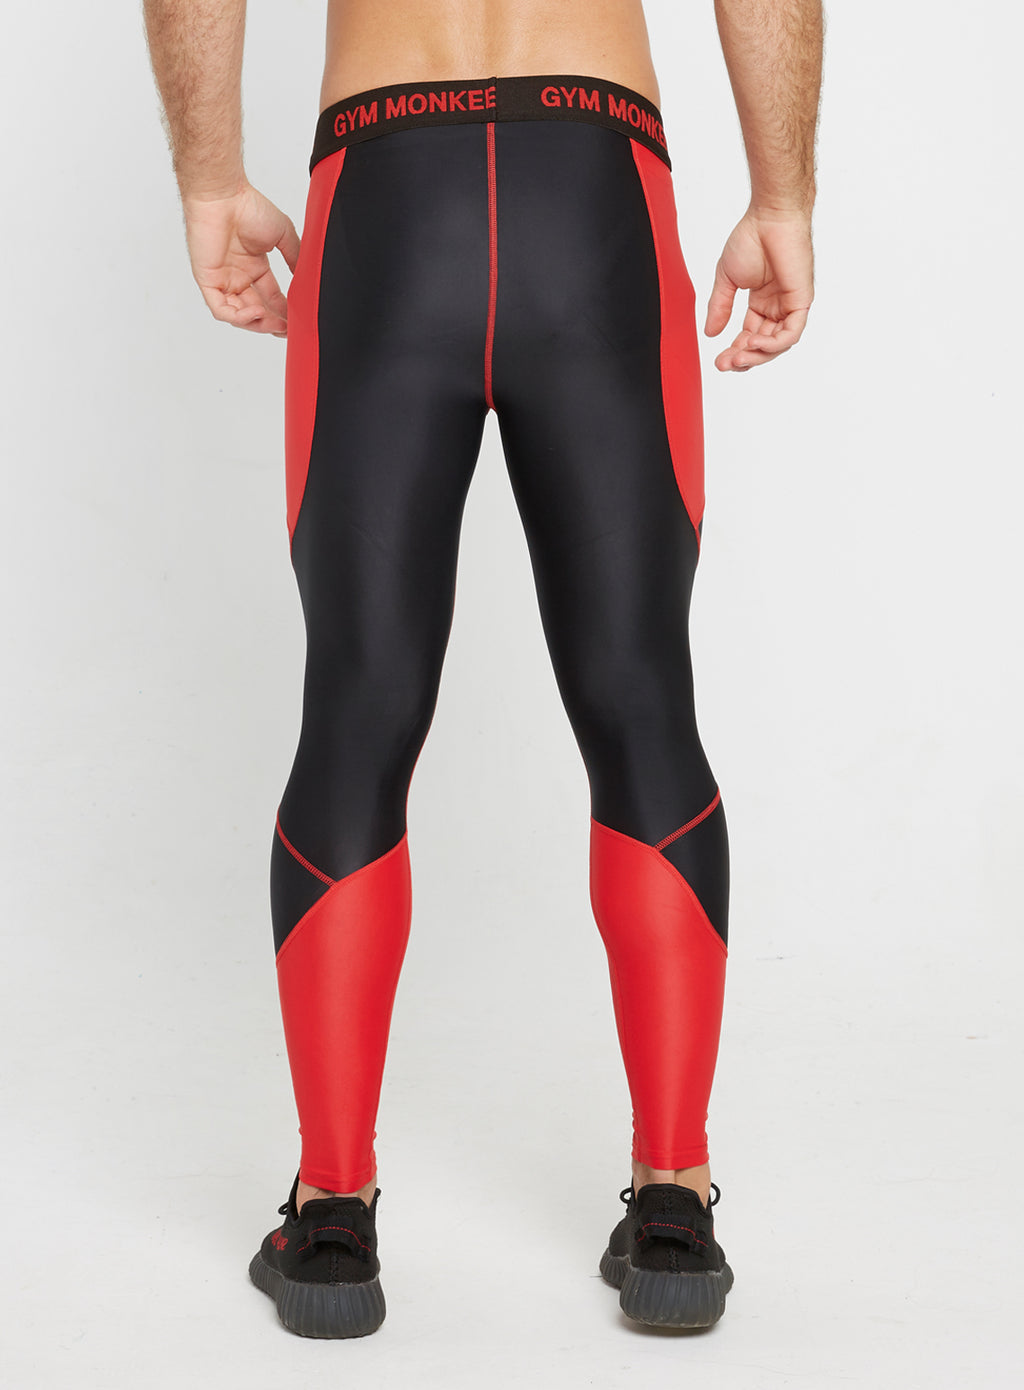 Gym Monkee - Black and Red Leggings REAR